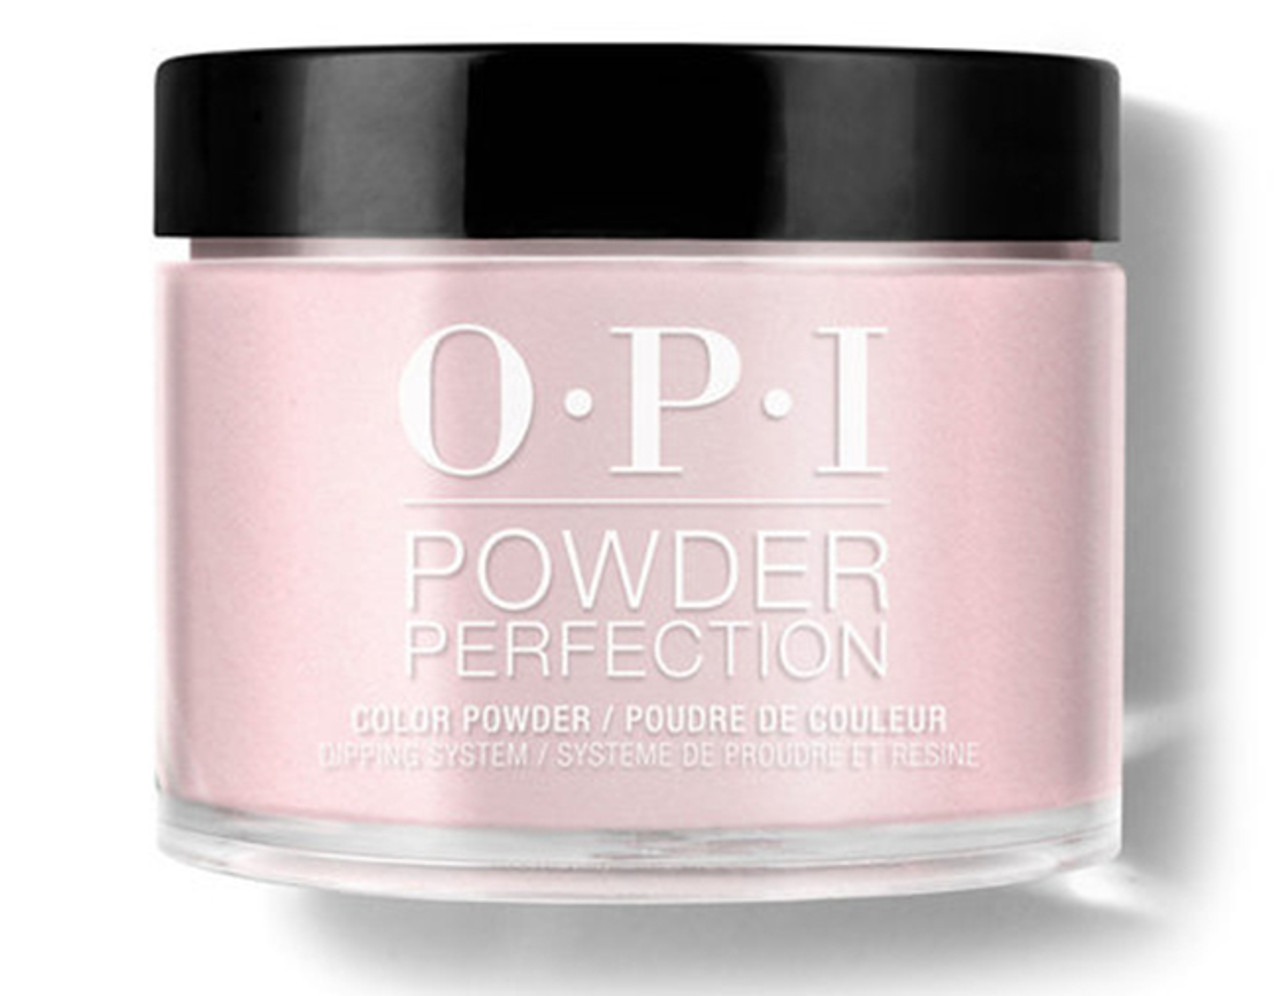 OPI Dipping Powder Perfection One Heckla Of A Color! - 1.5 oz / 43 G